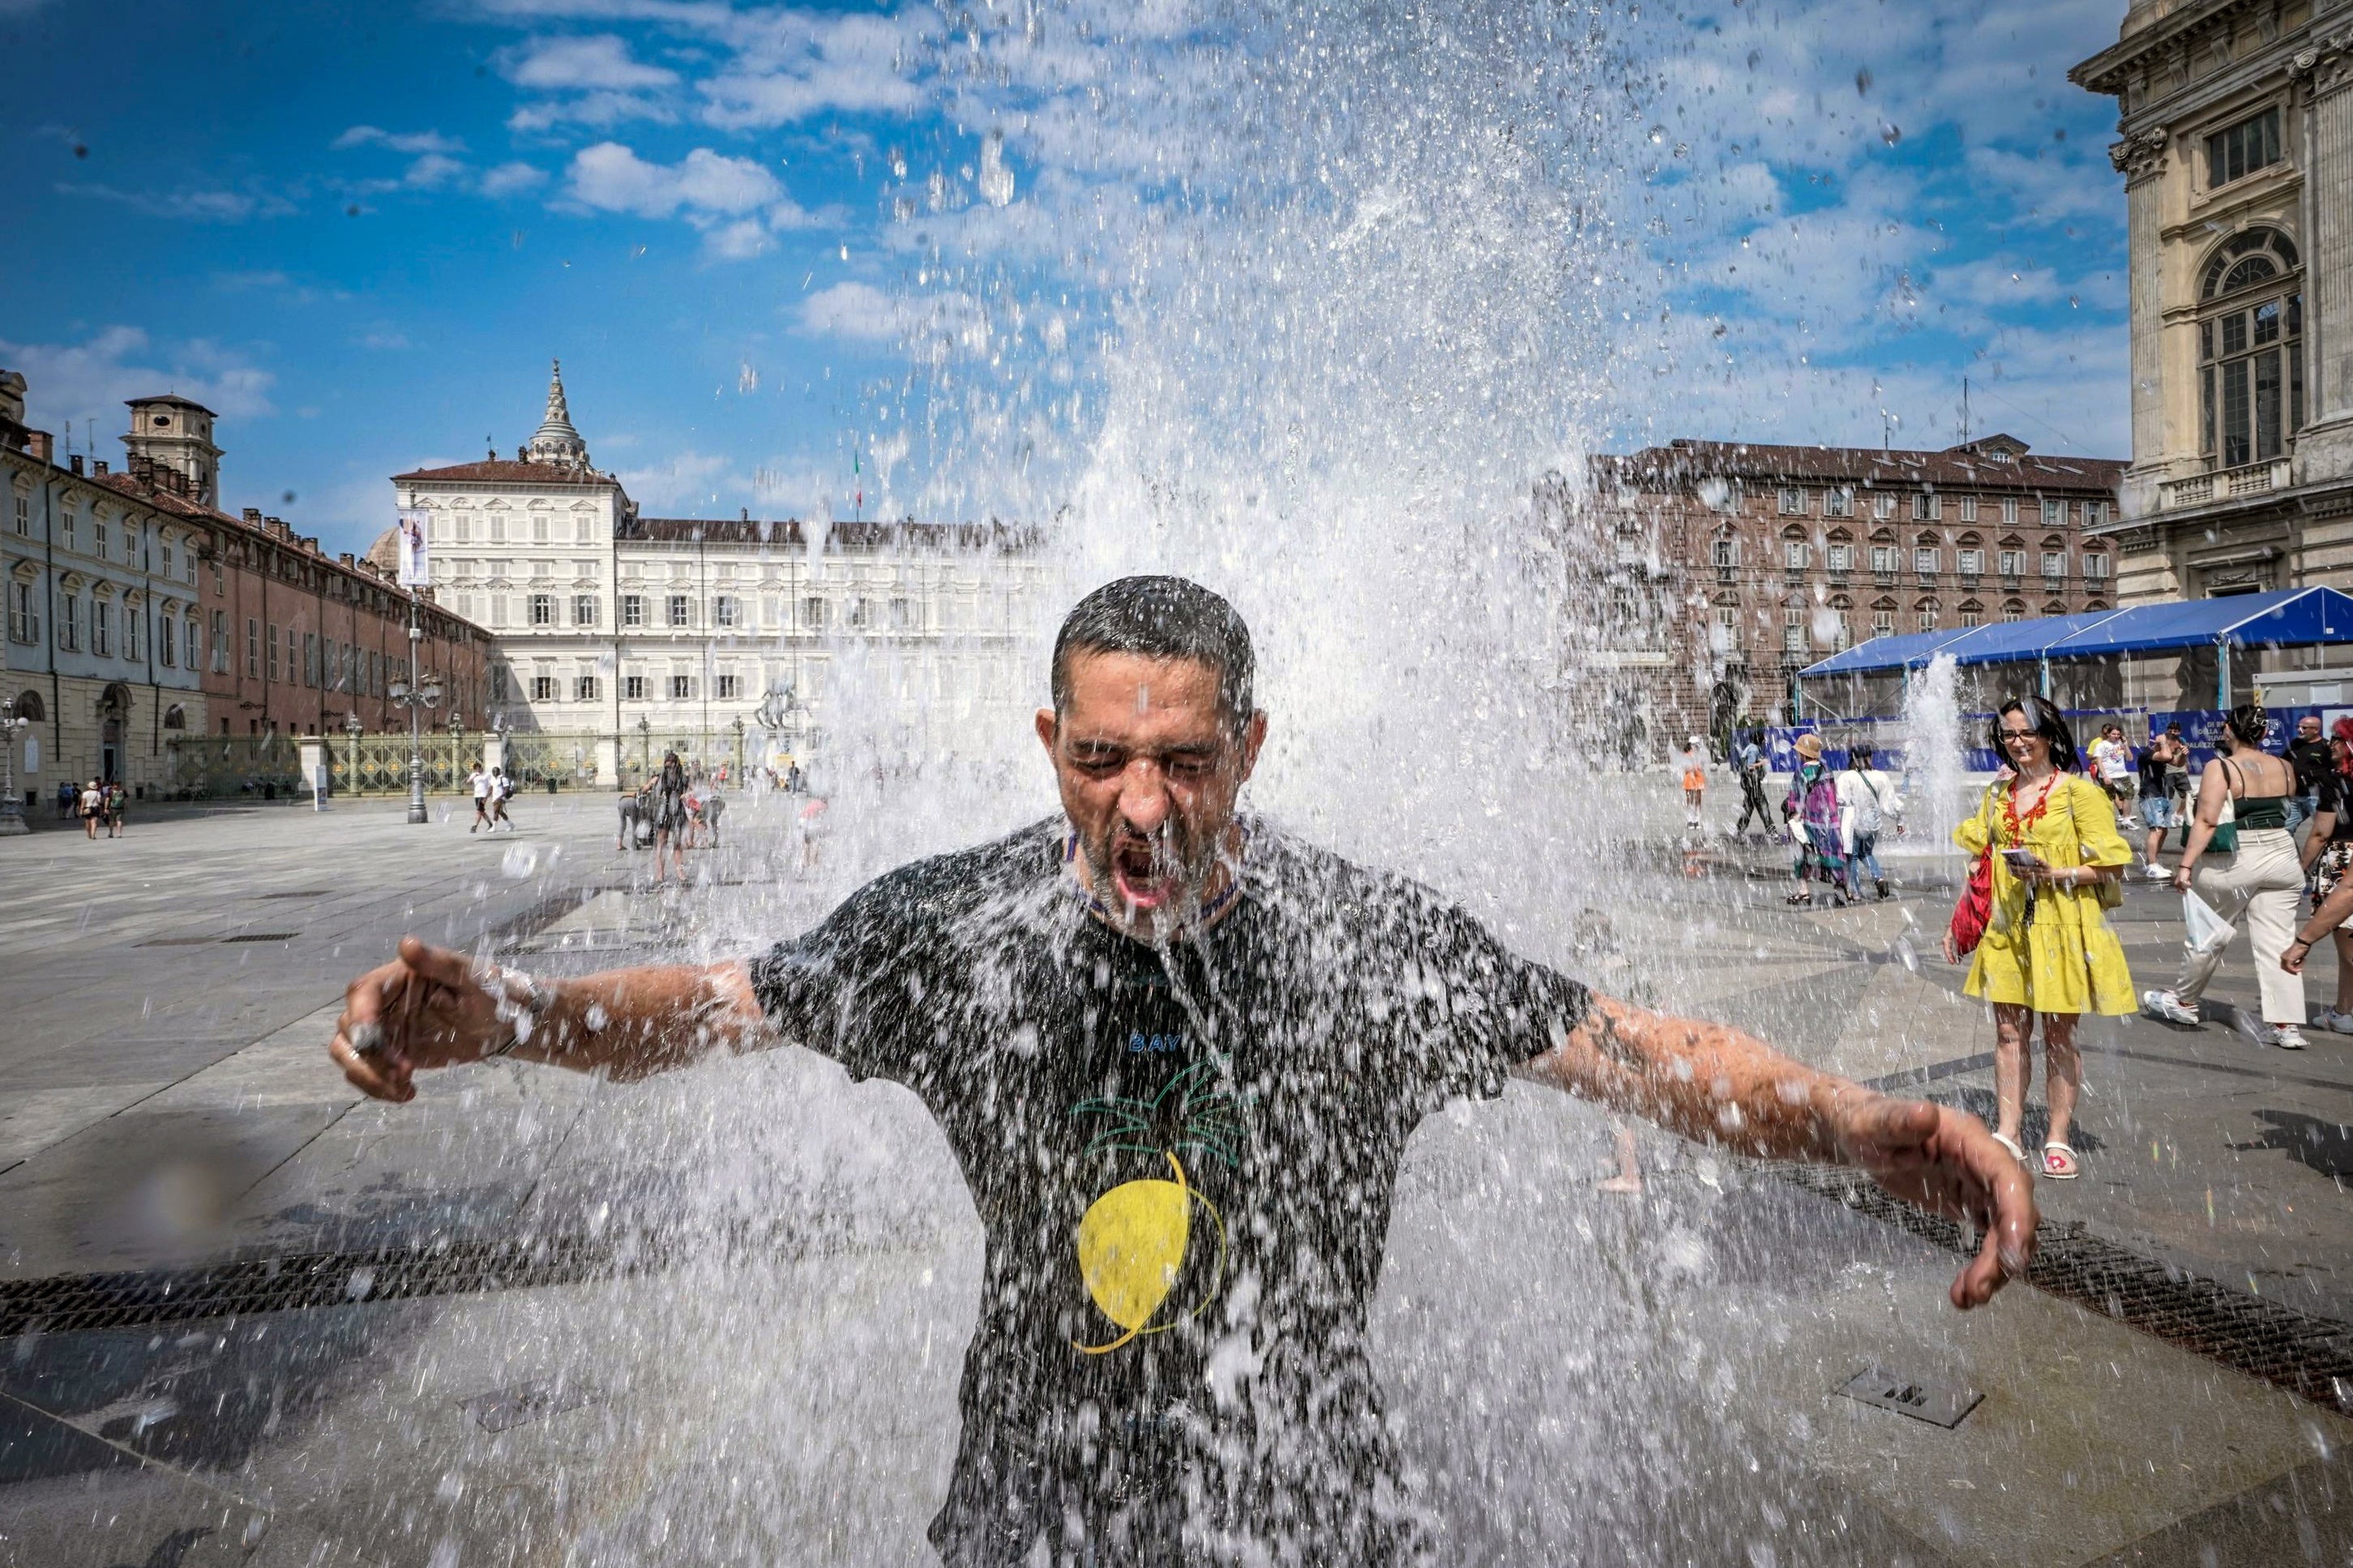 A man cools off in a fountain in Turin, Italy, during the Cerberus heatwave on Saturday